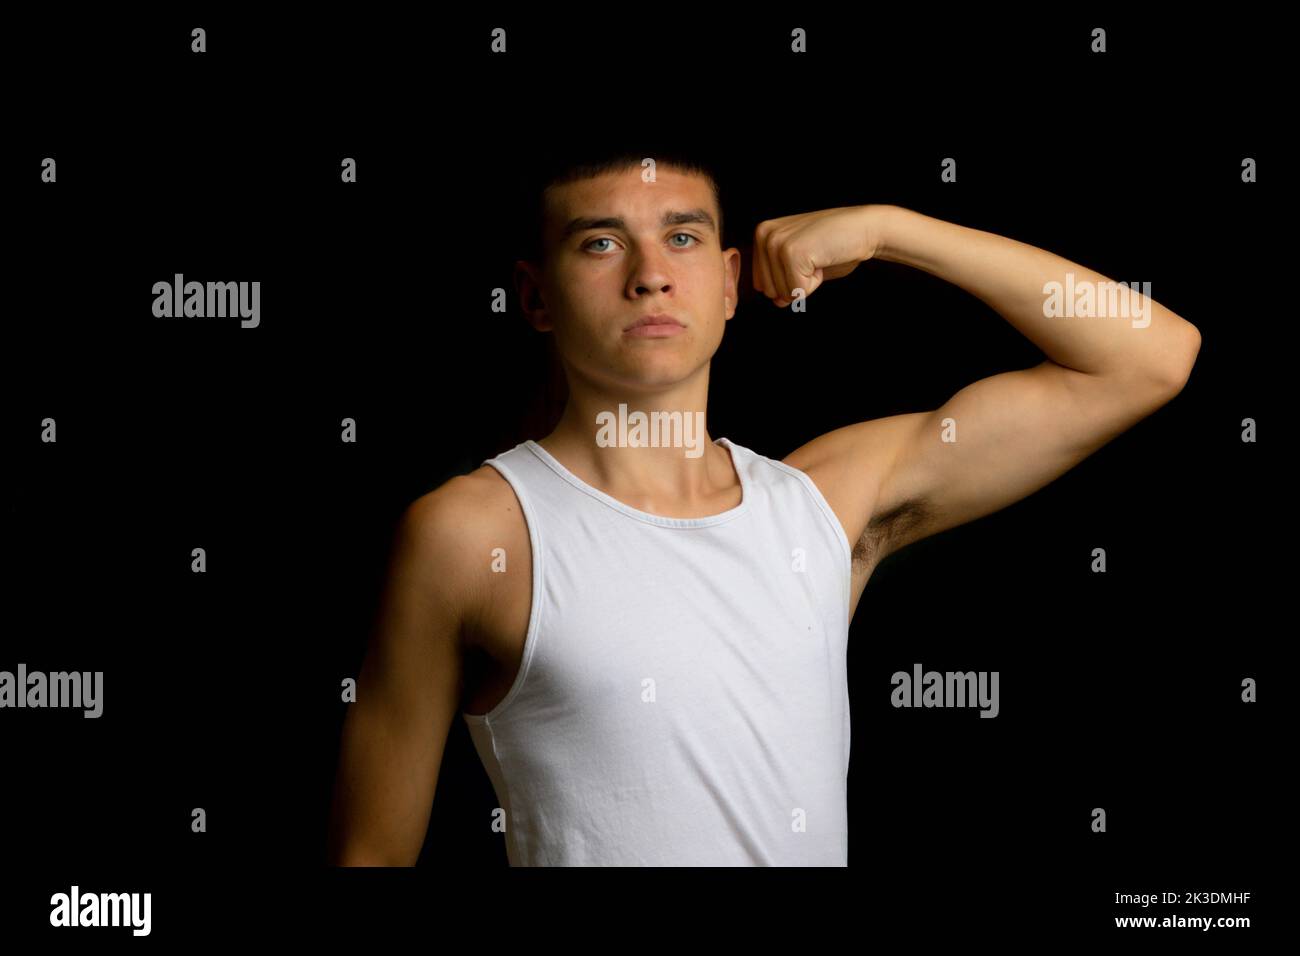 19 year old teenage boy wearing a tank top flexing his arm muscles Stock Photo